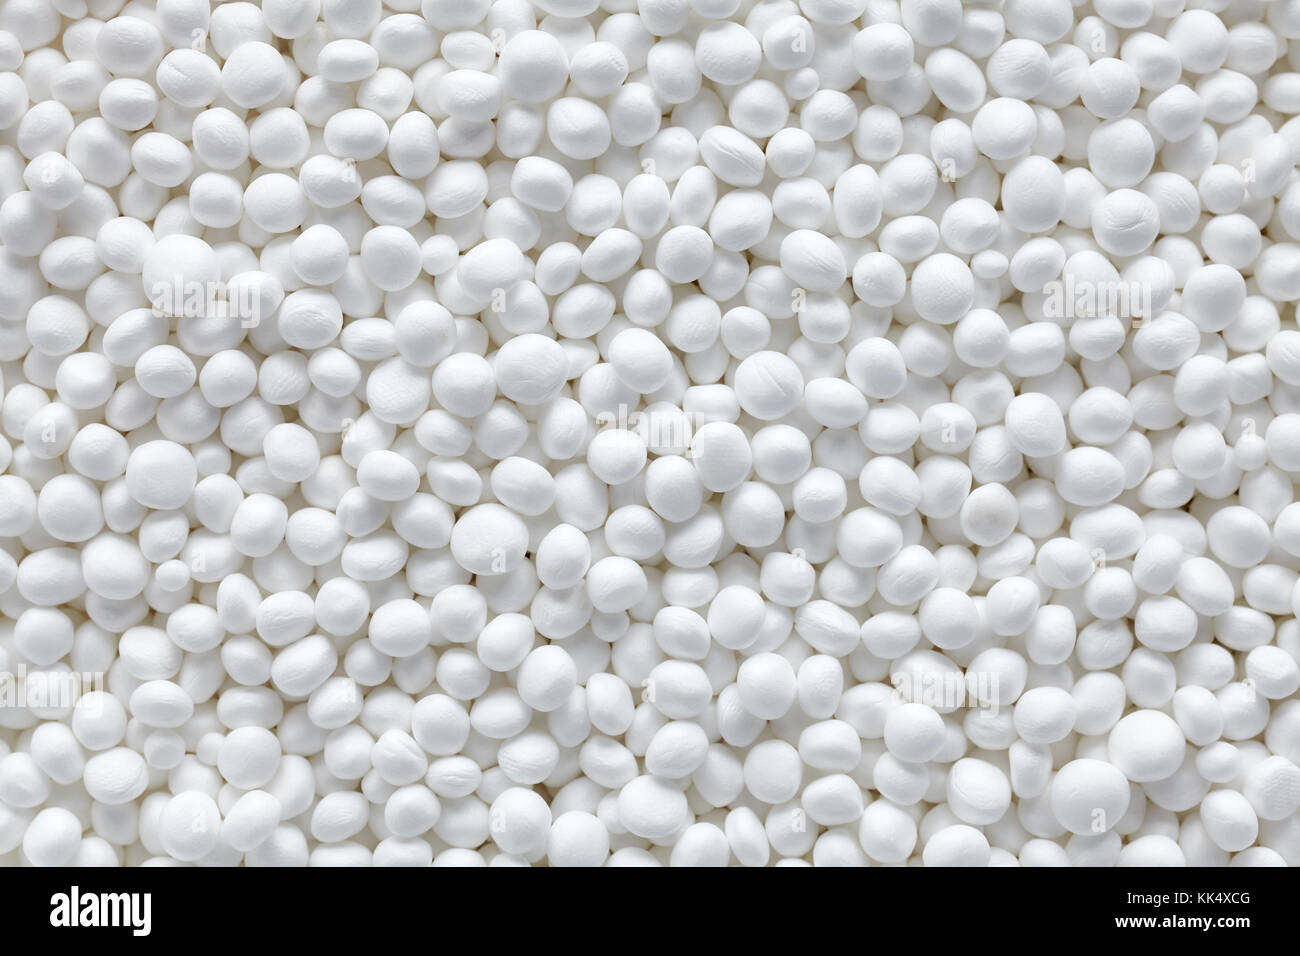 Styrofoam balls creating abstract texture or background. Stock Photo